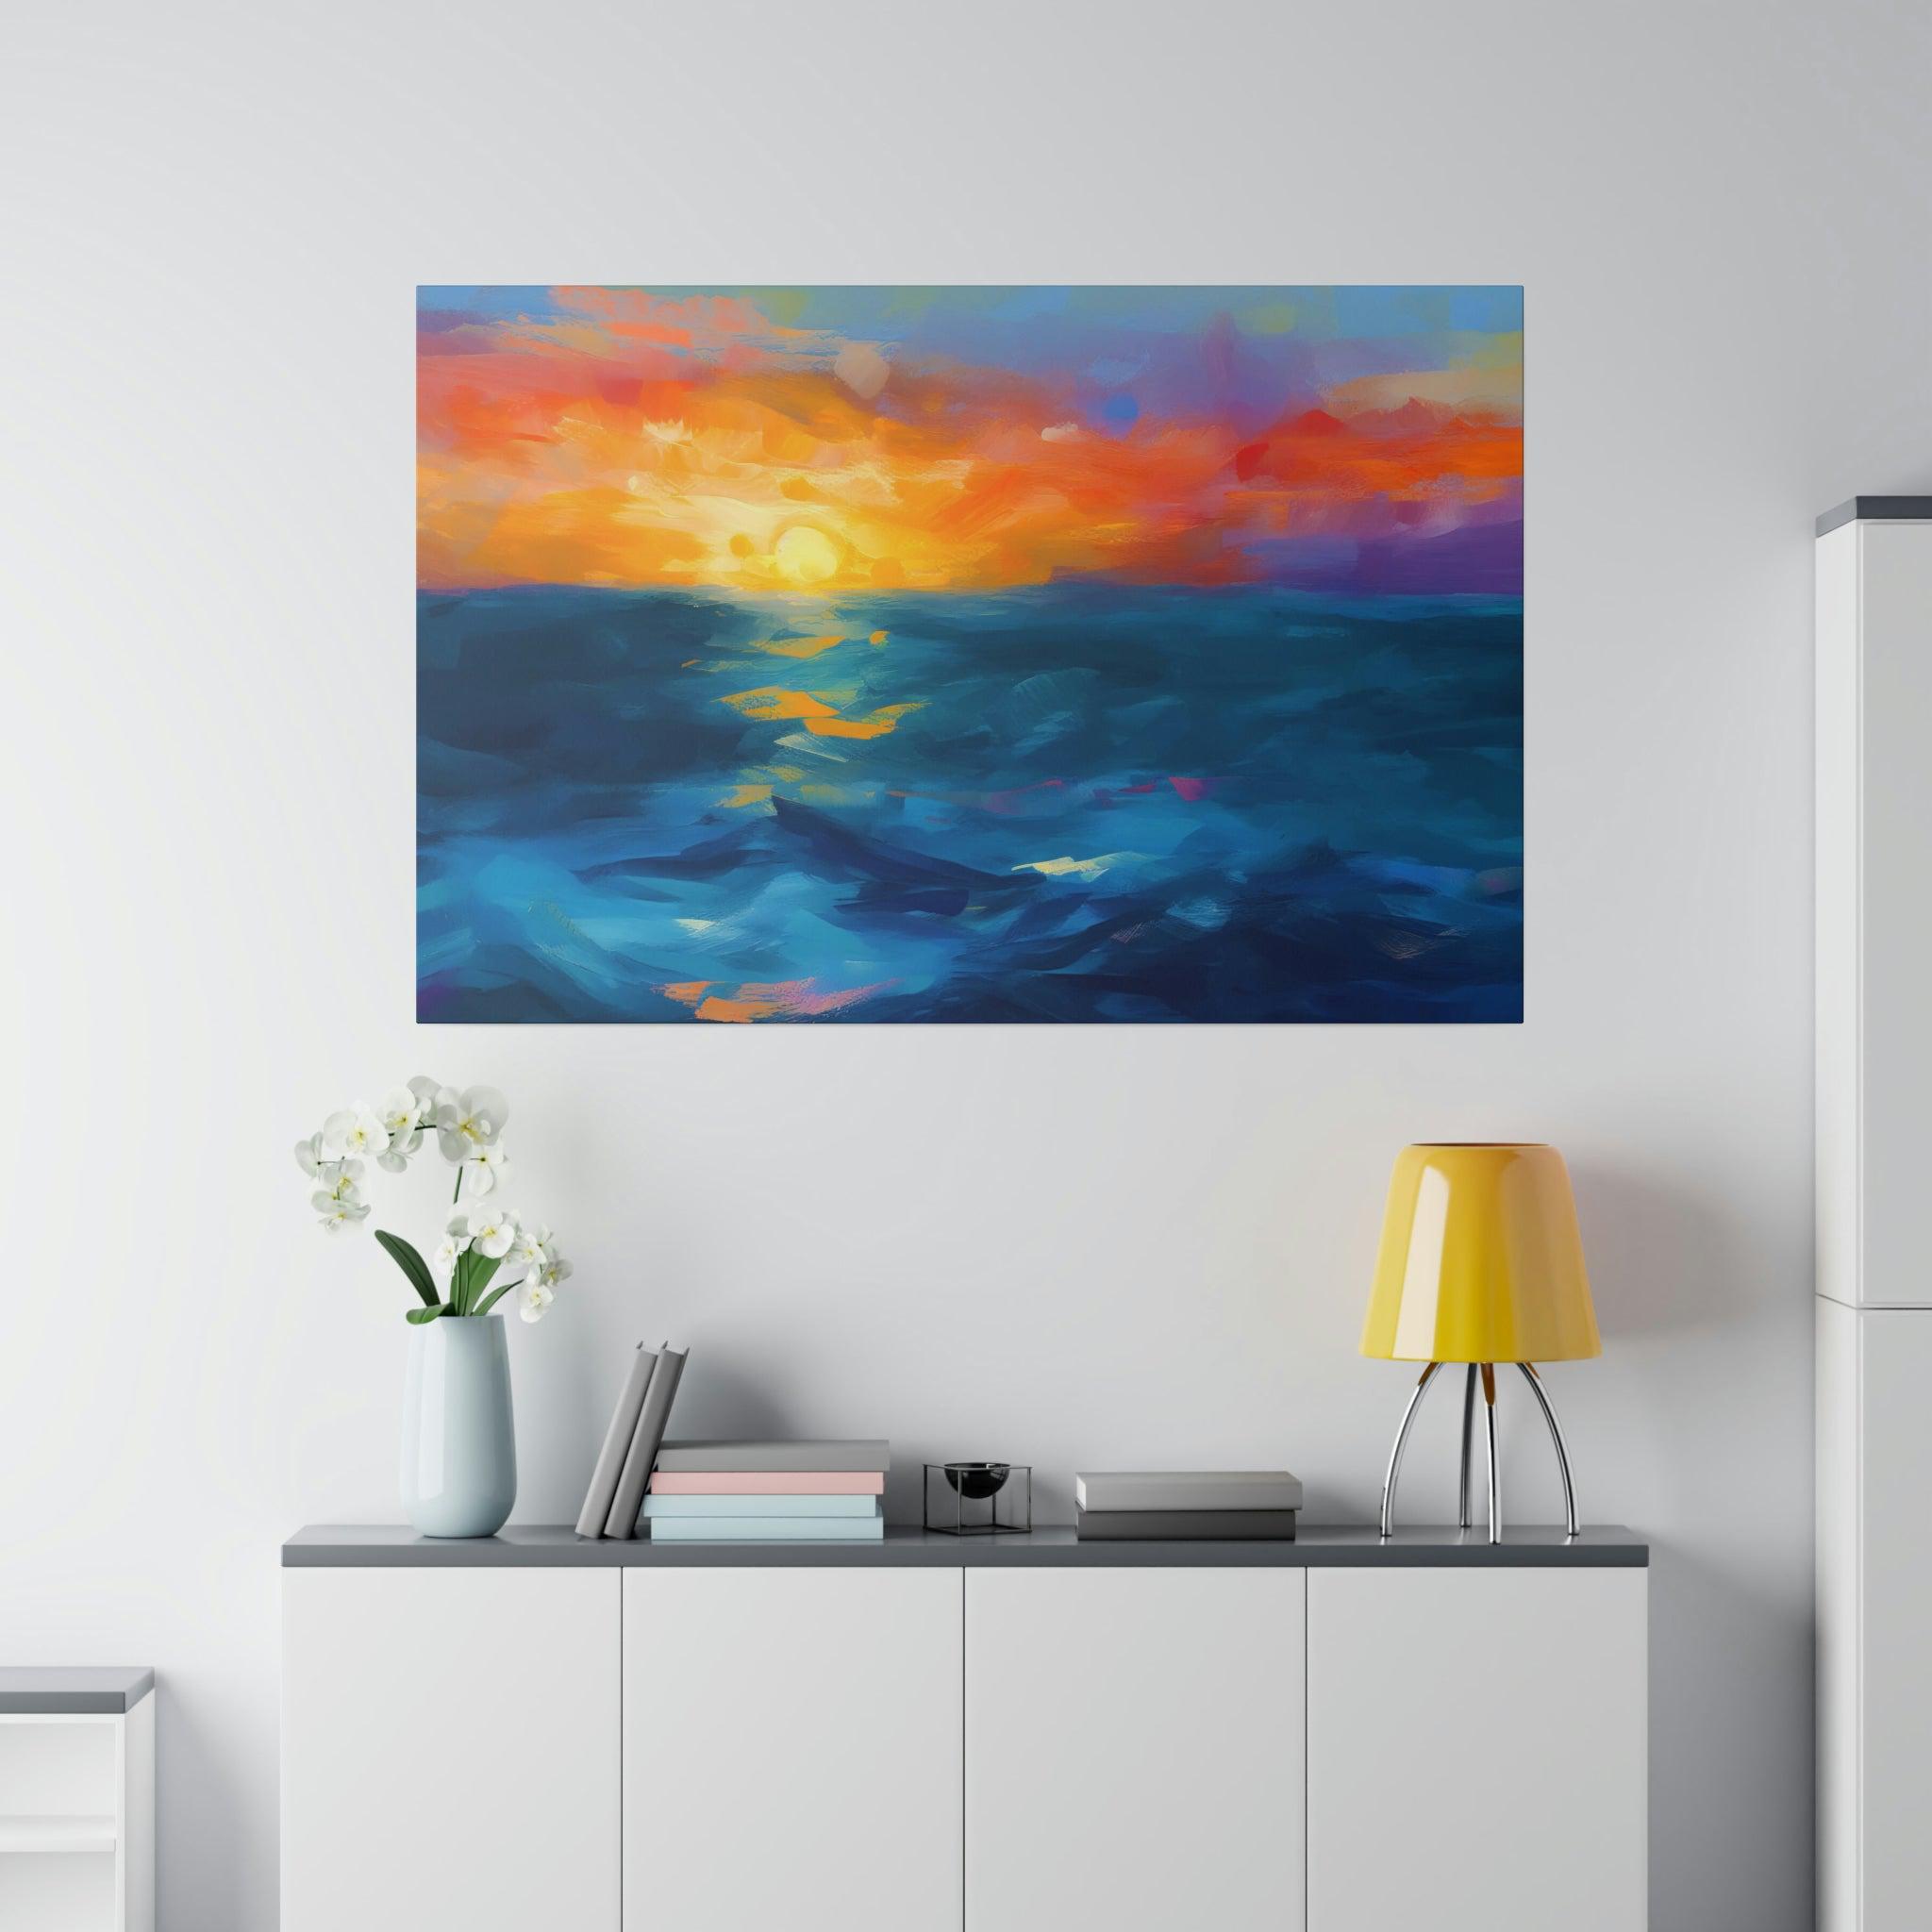 Ocean Sunset 2 Wall Art - Abstract Picture Canvas Print Wall Painting Modern Artwork Wall Art for Living Room Home Office Décor